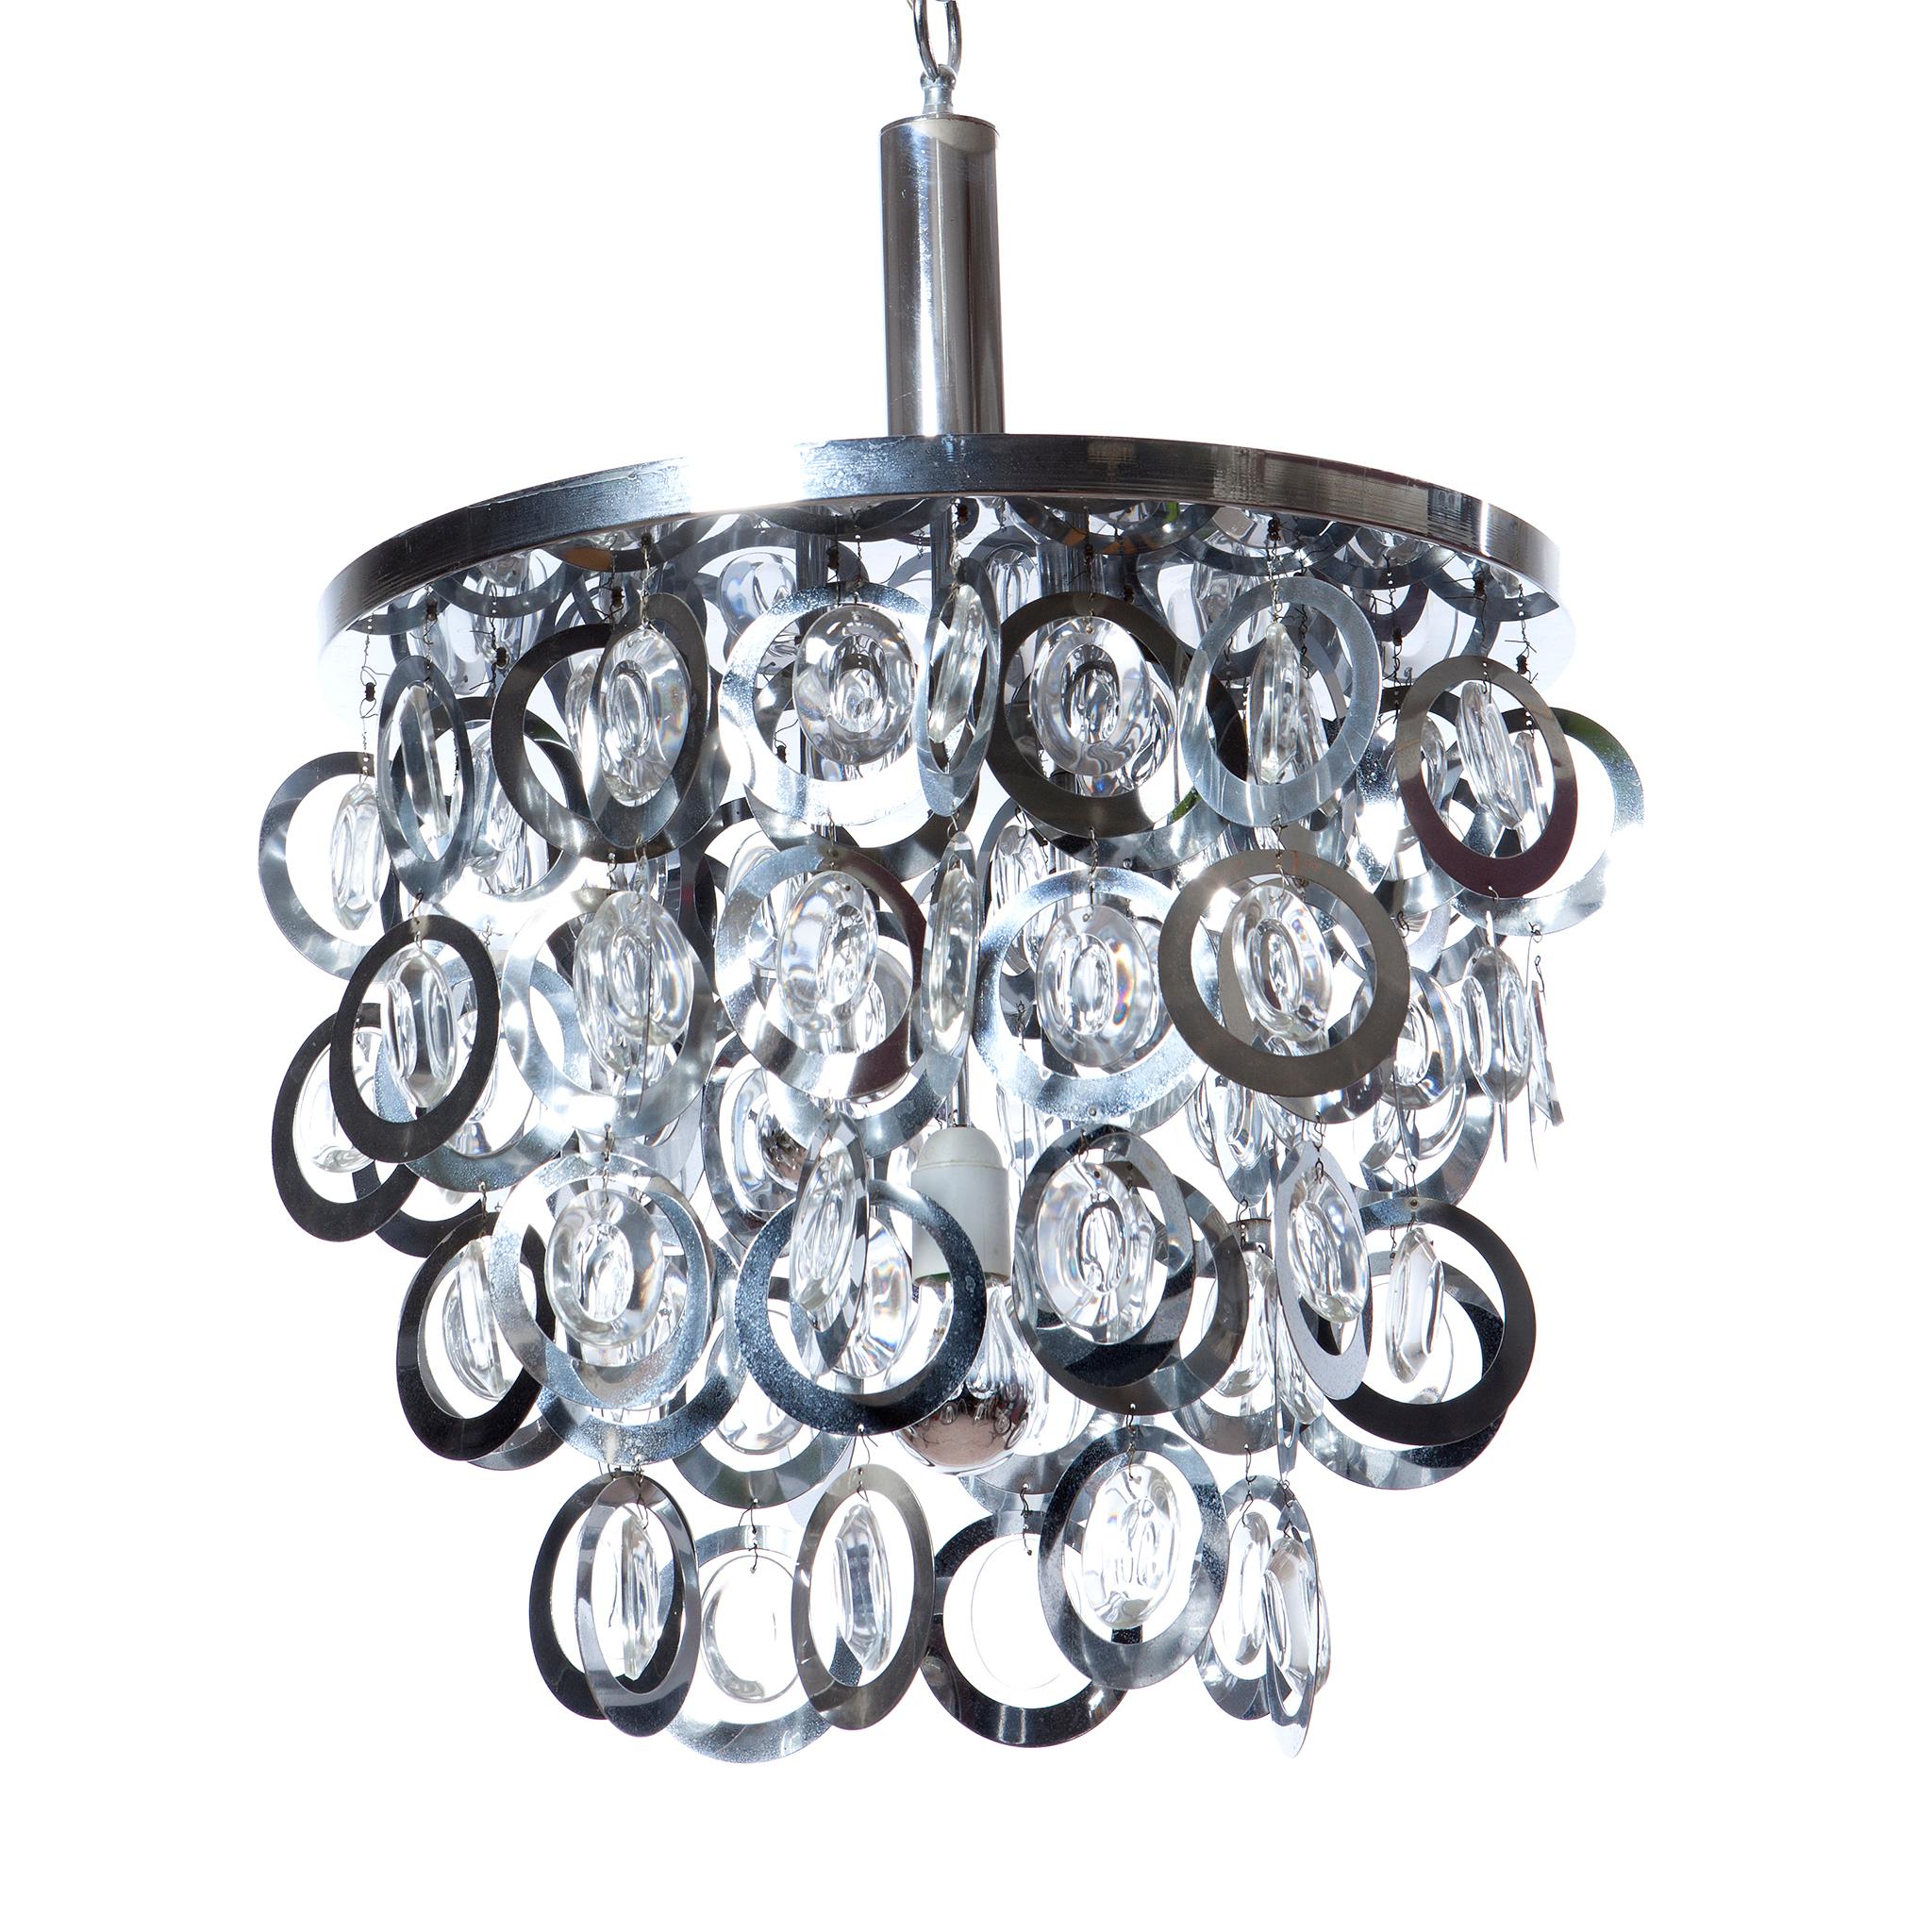 This striking chandelier has 4 levels of chrome rings and glass circles that make the light the eye catcher of the room. 5 light bulb fittings.